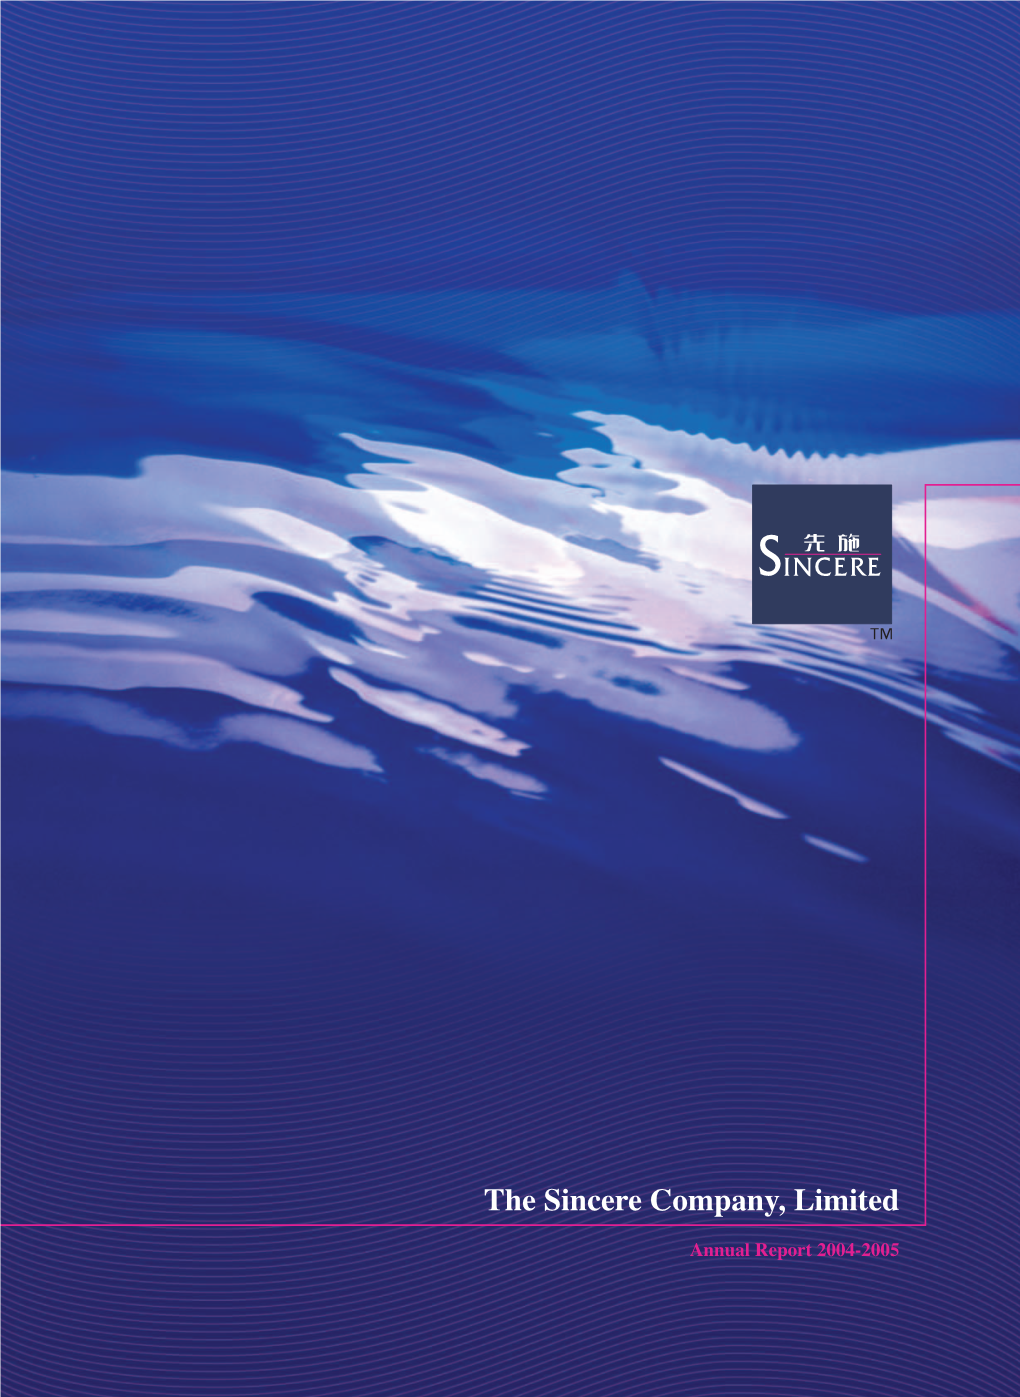 The Sincere Company, Limited Annual Report 2004-2005